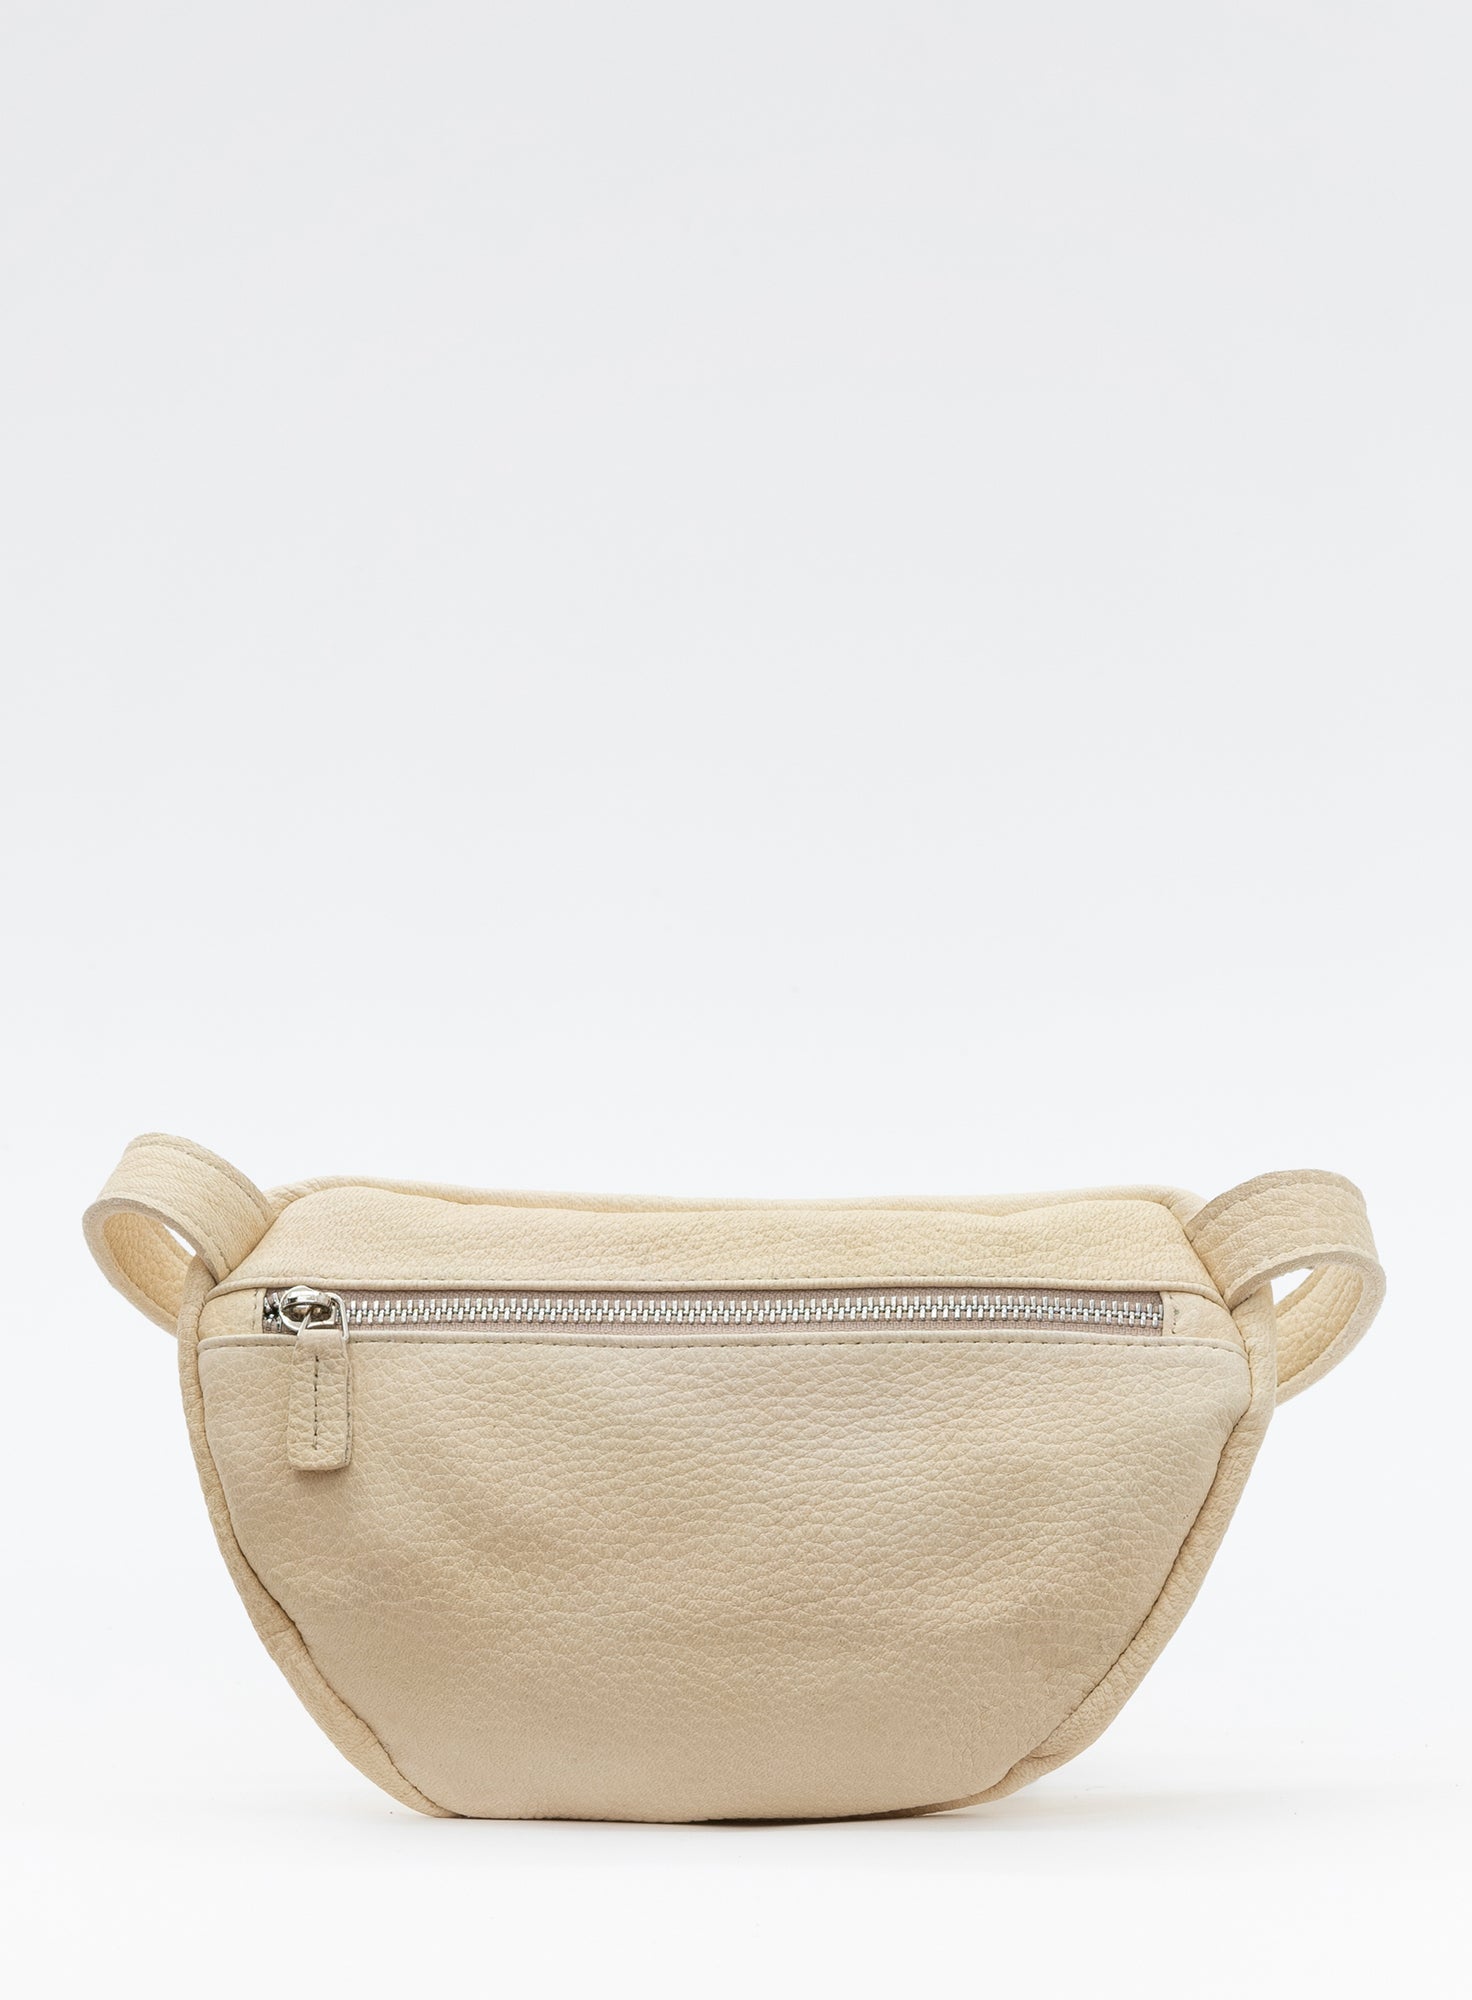 HIP_BAG_CAN_Heyhey_Waldfreunde_White_Designed_in_Berlin_Made_to_last_Handmade_in_Poland.